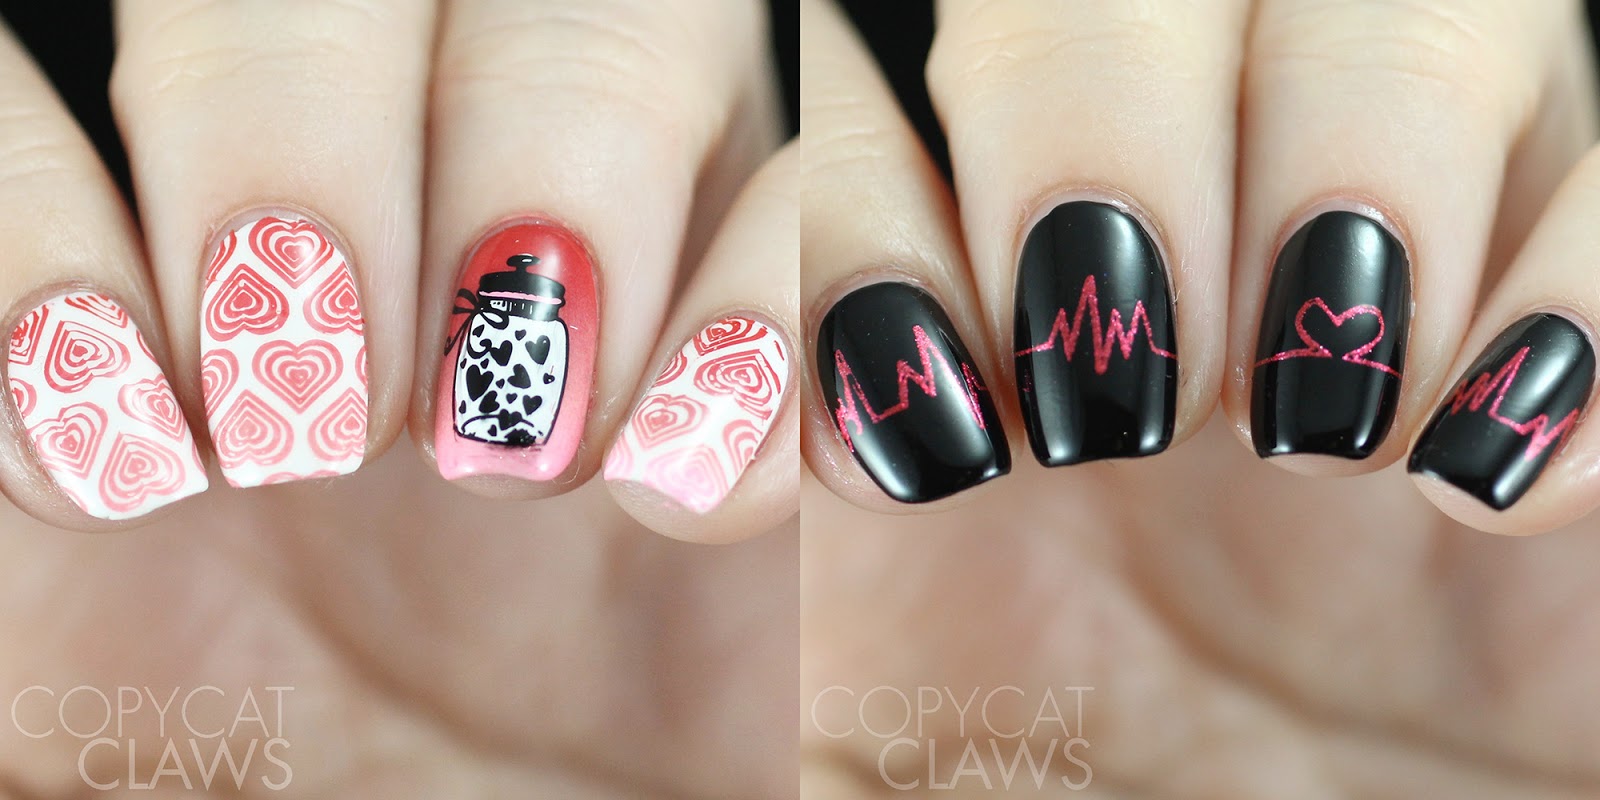 Copycat Claws: Maniology M117 Stamping Plate and Galentine